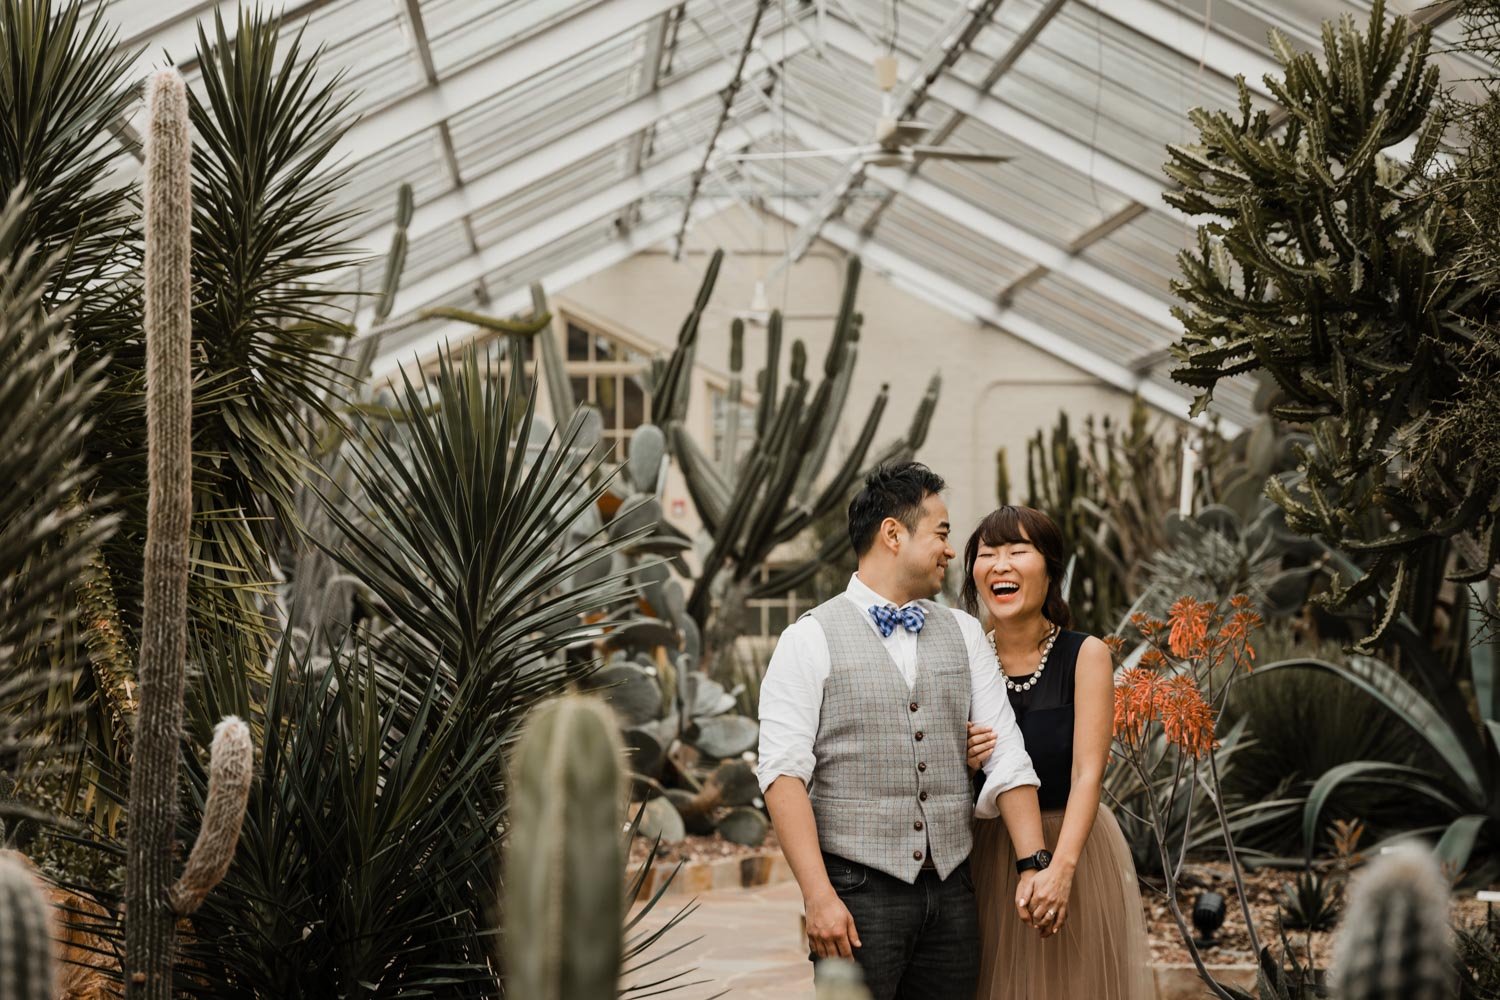 dc baltimore philly destination wedding photographer rawlings conservatory greenhouse engagement session by barbara o photography-9.jpg